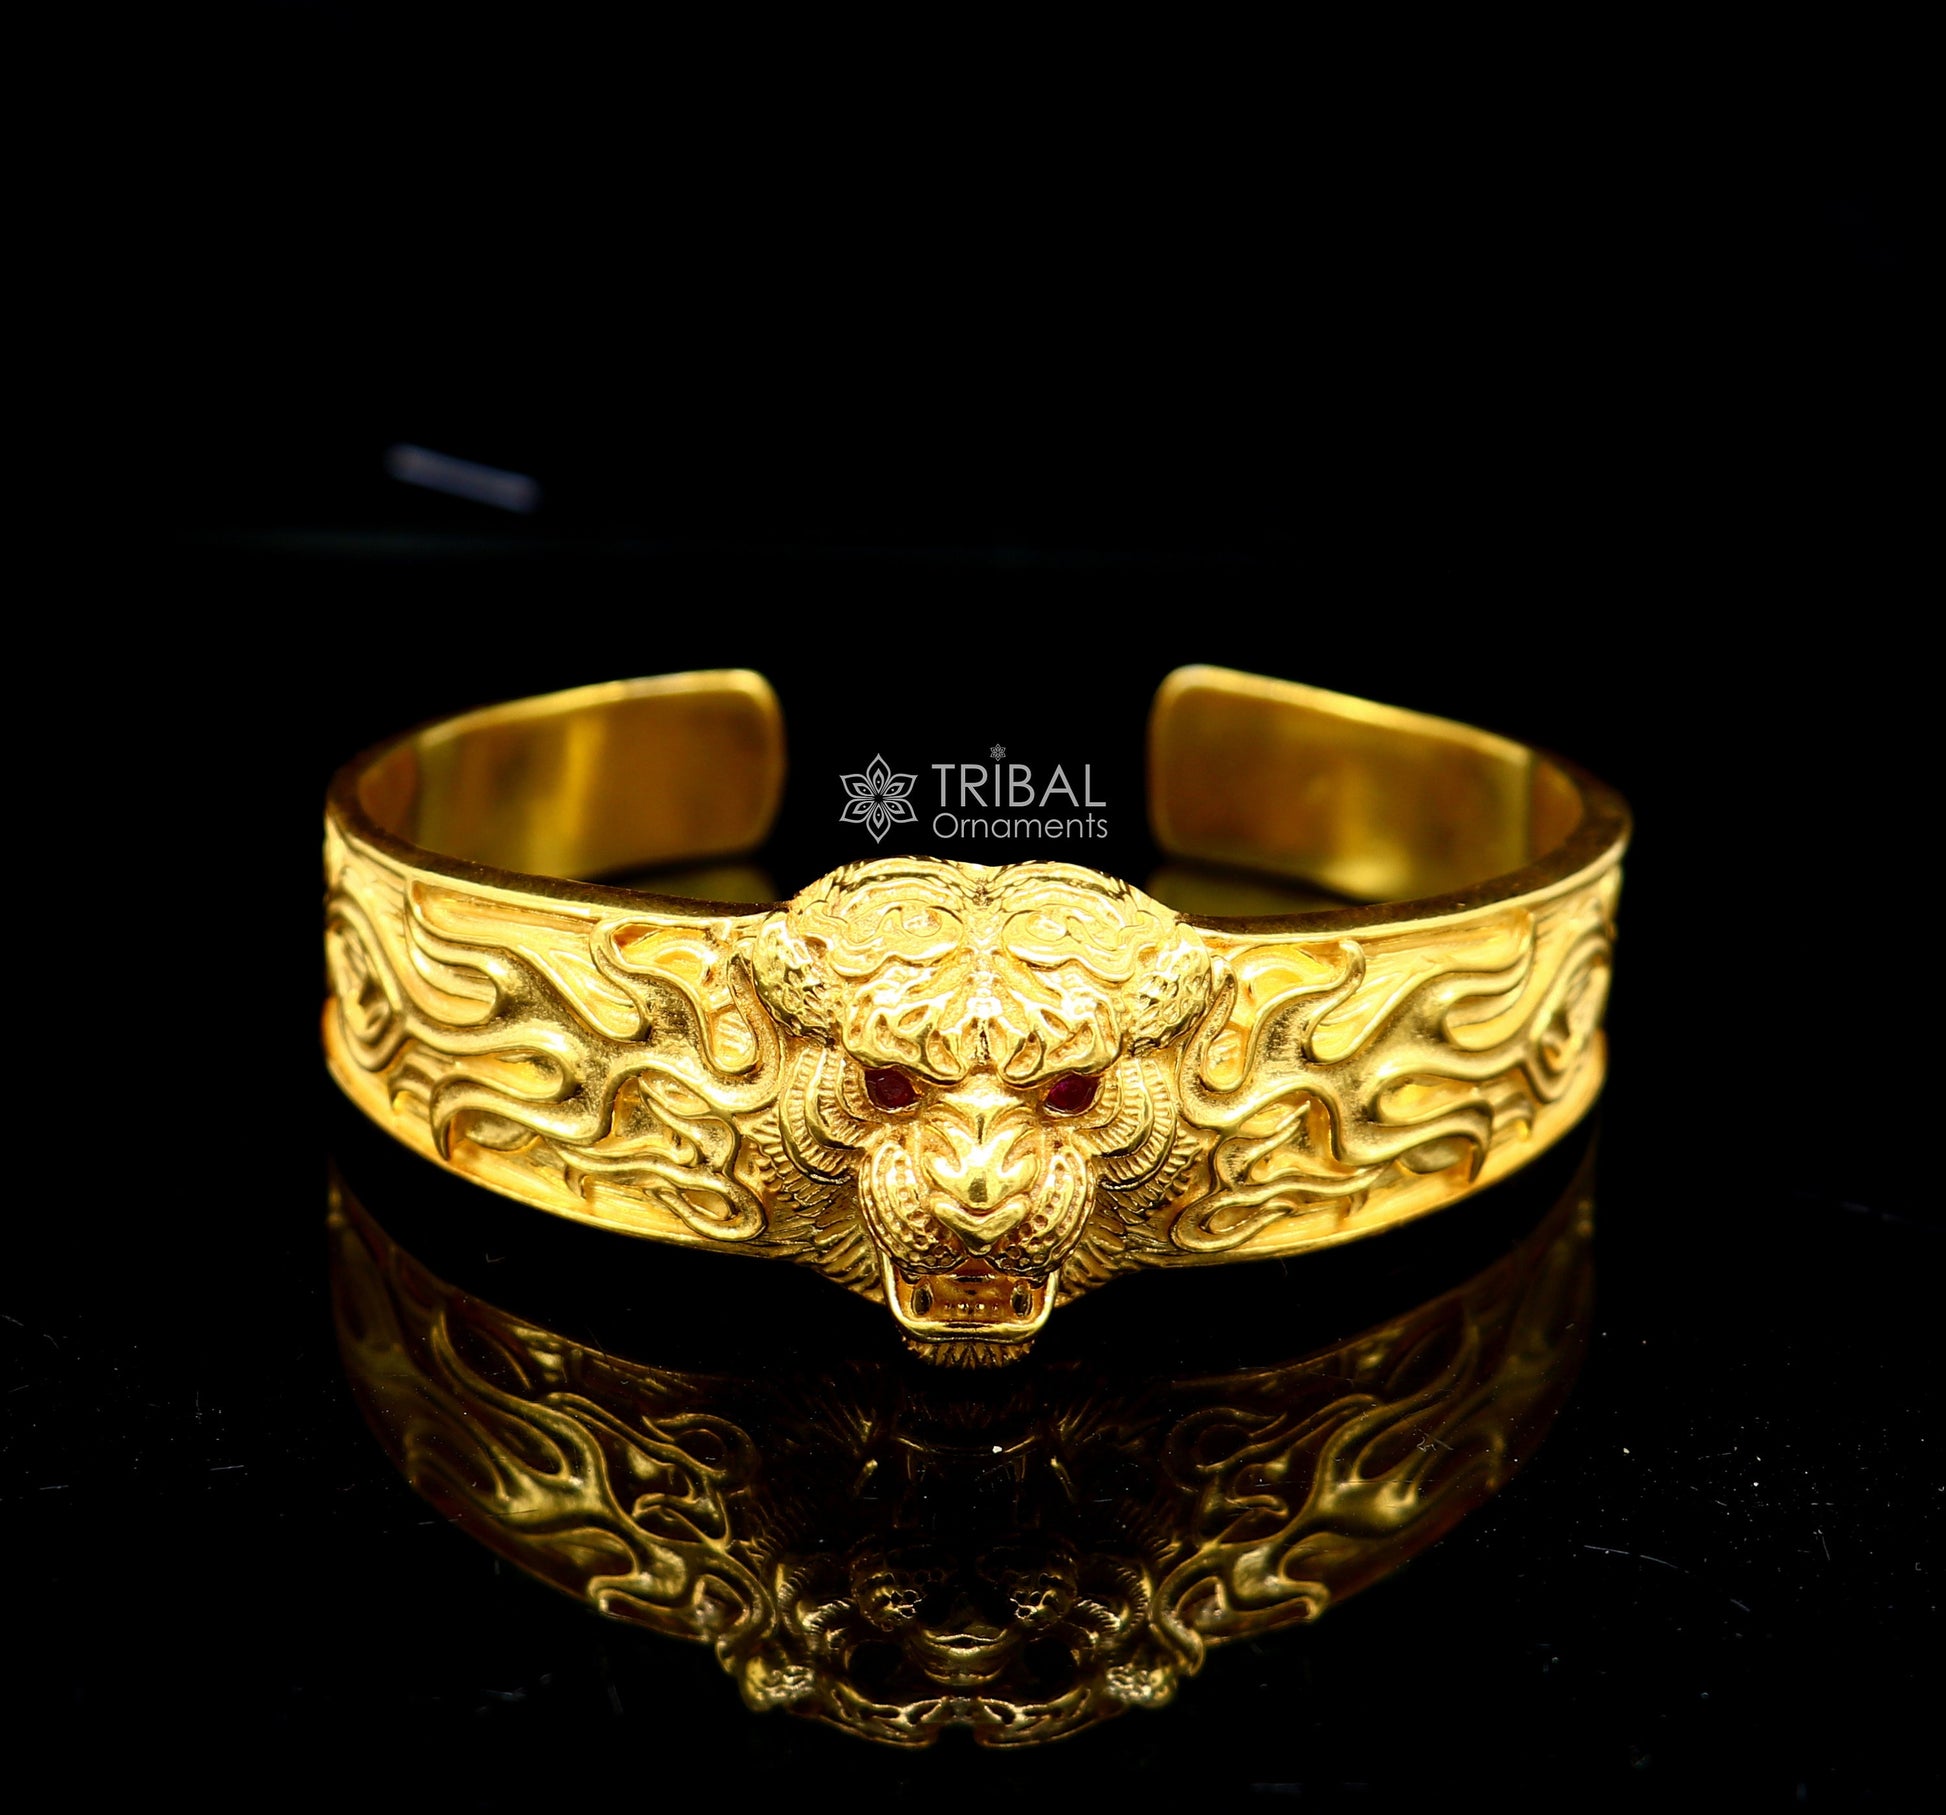 925 Sterling silver handmade excellent lion face solid cuff kada Gold polished bracelet amazing bracelet vintage style men's jewelry cuff147 - TRIBAL ORNAMENTS